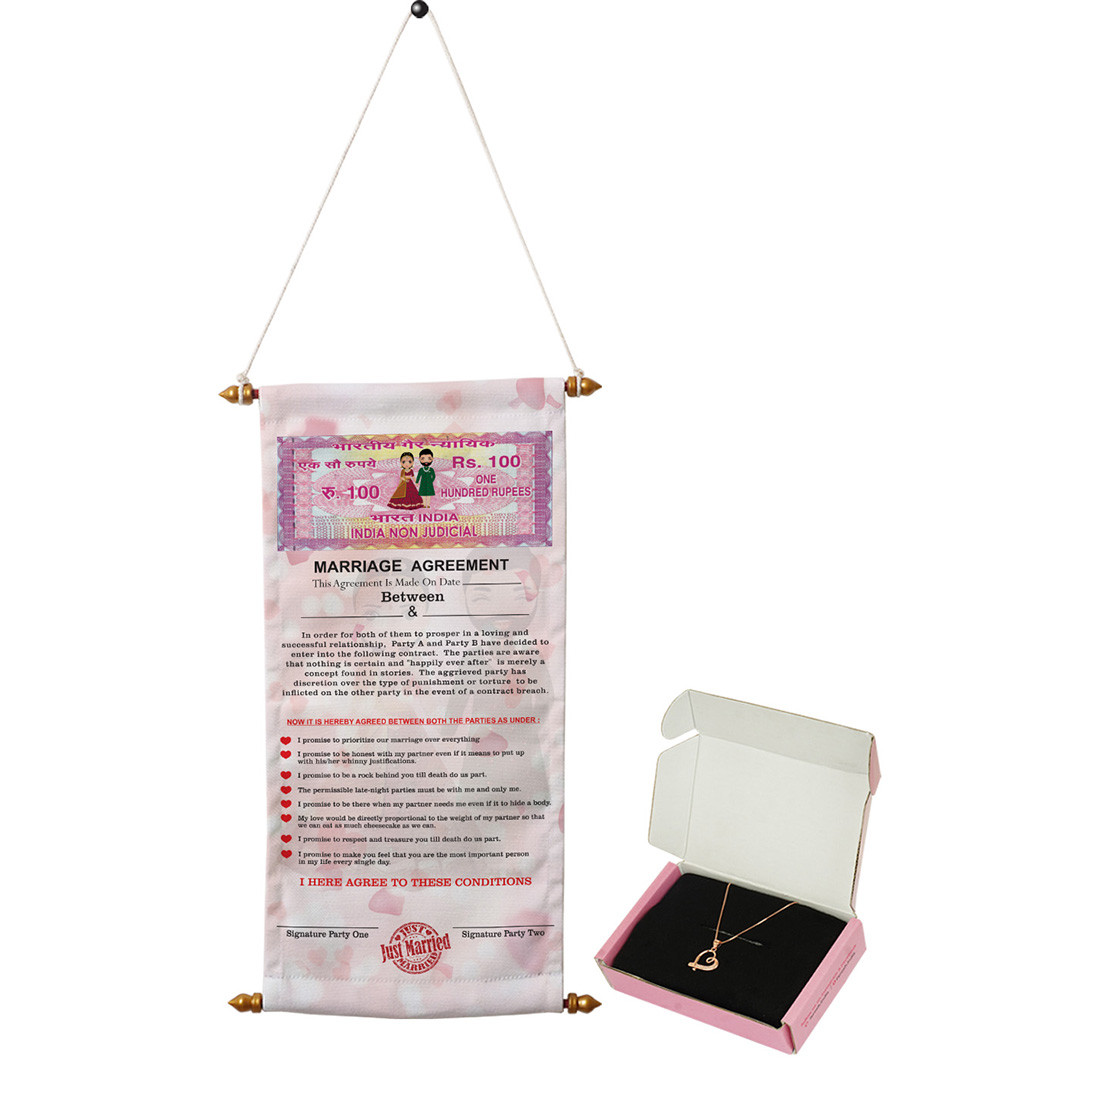 MARRIAGE GIFT BAG in Ludhiana - Dealers, Manufacturers & Suppliers -  Justdial